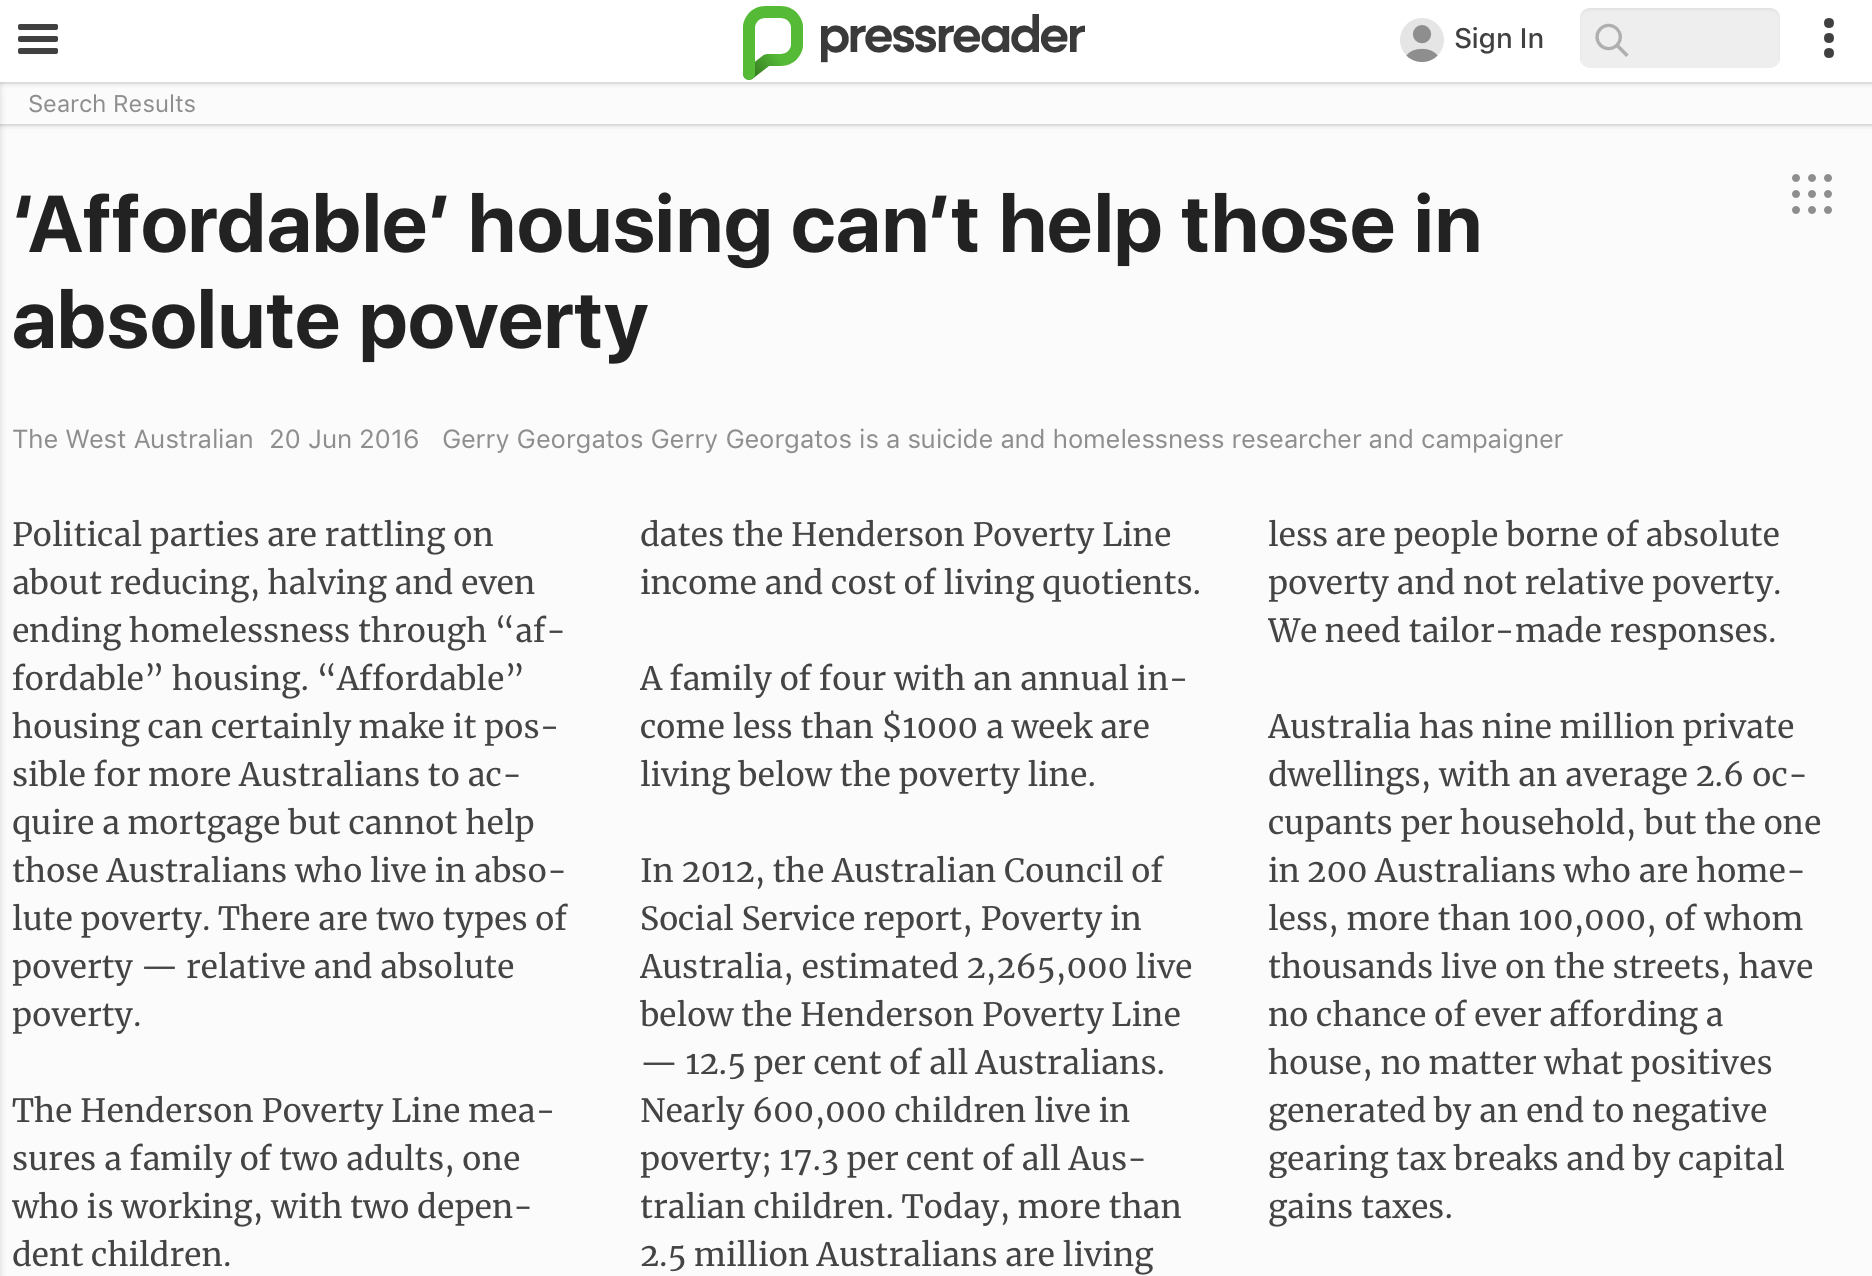 research article about poverty